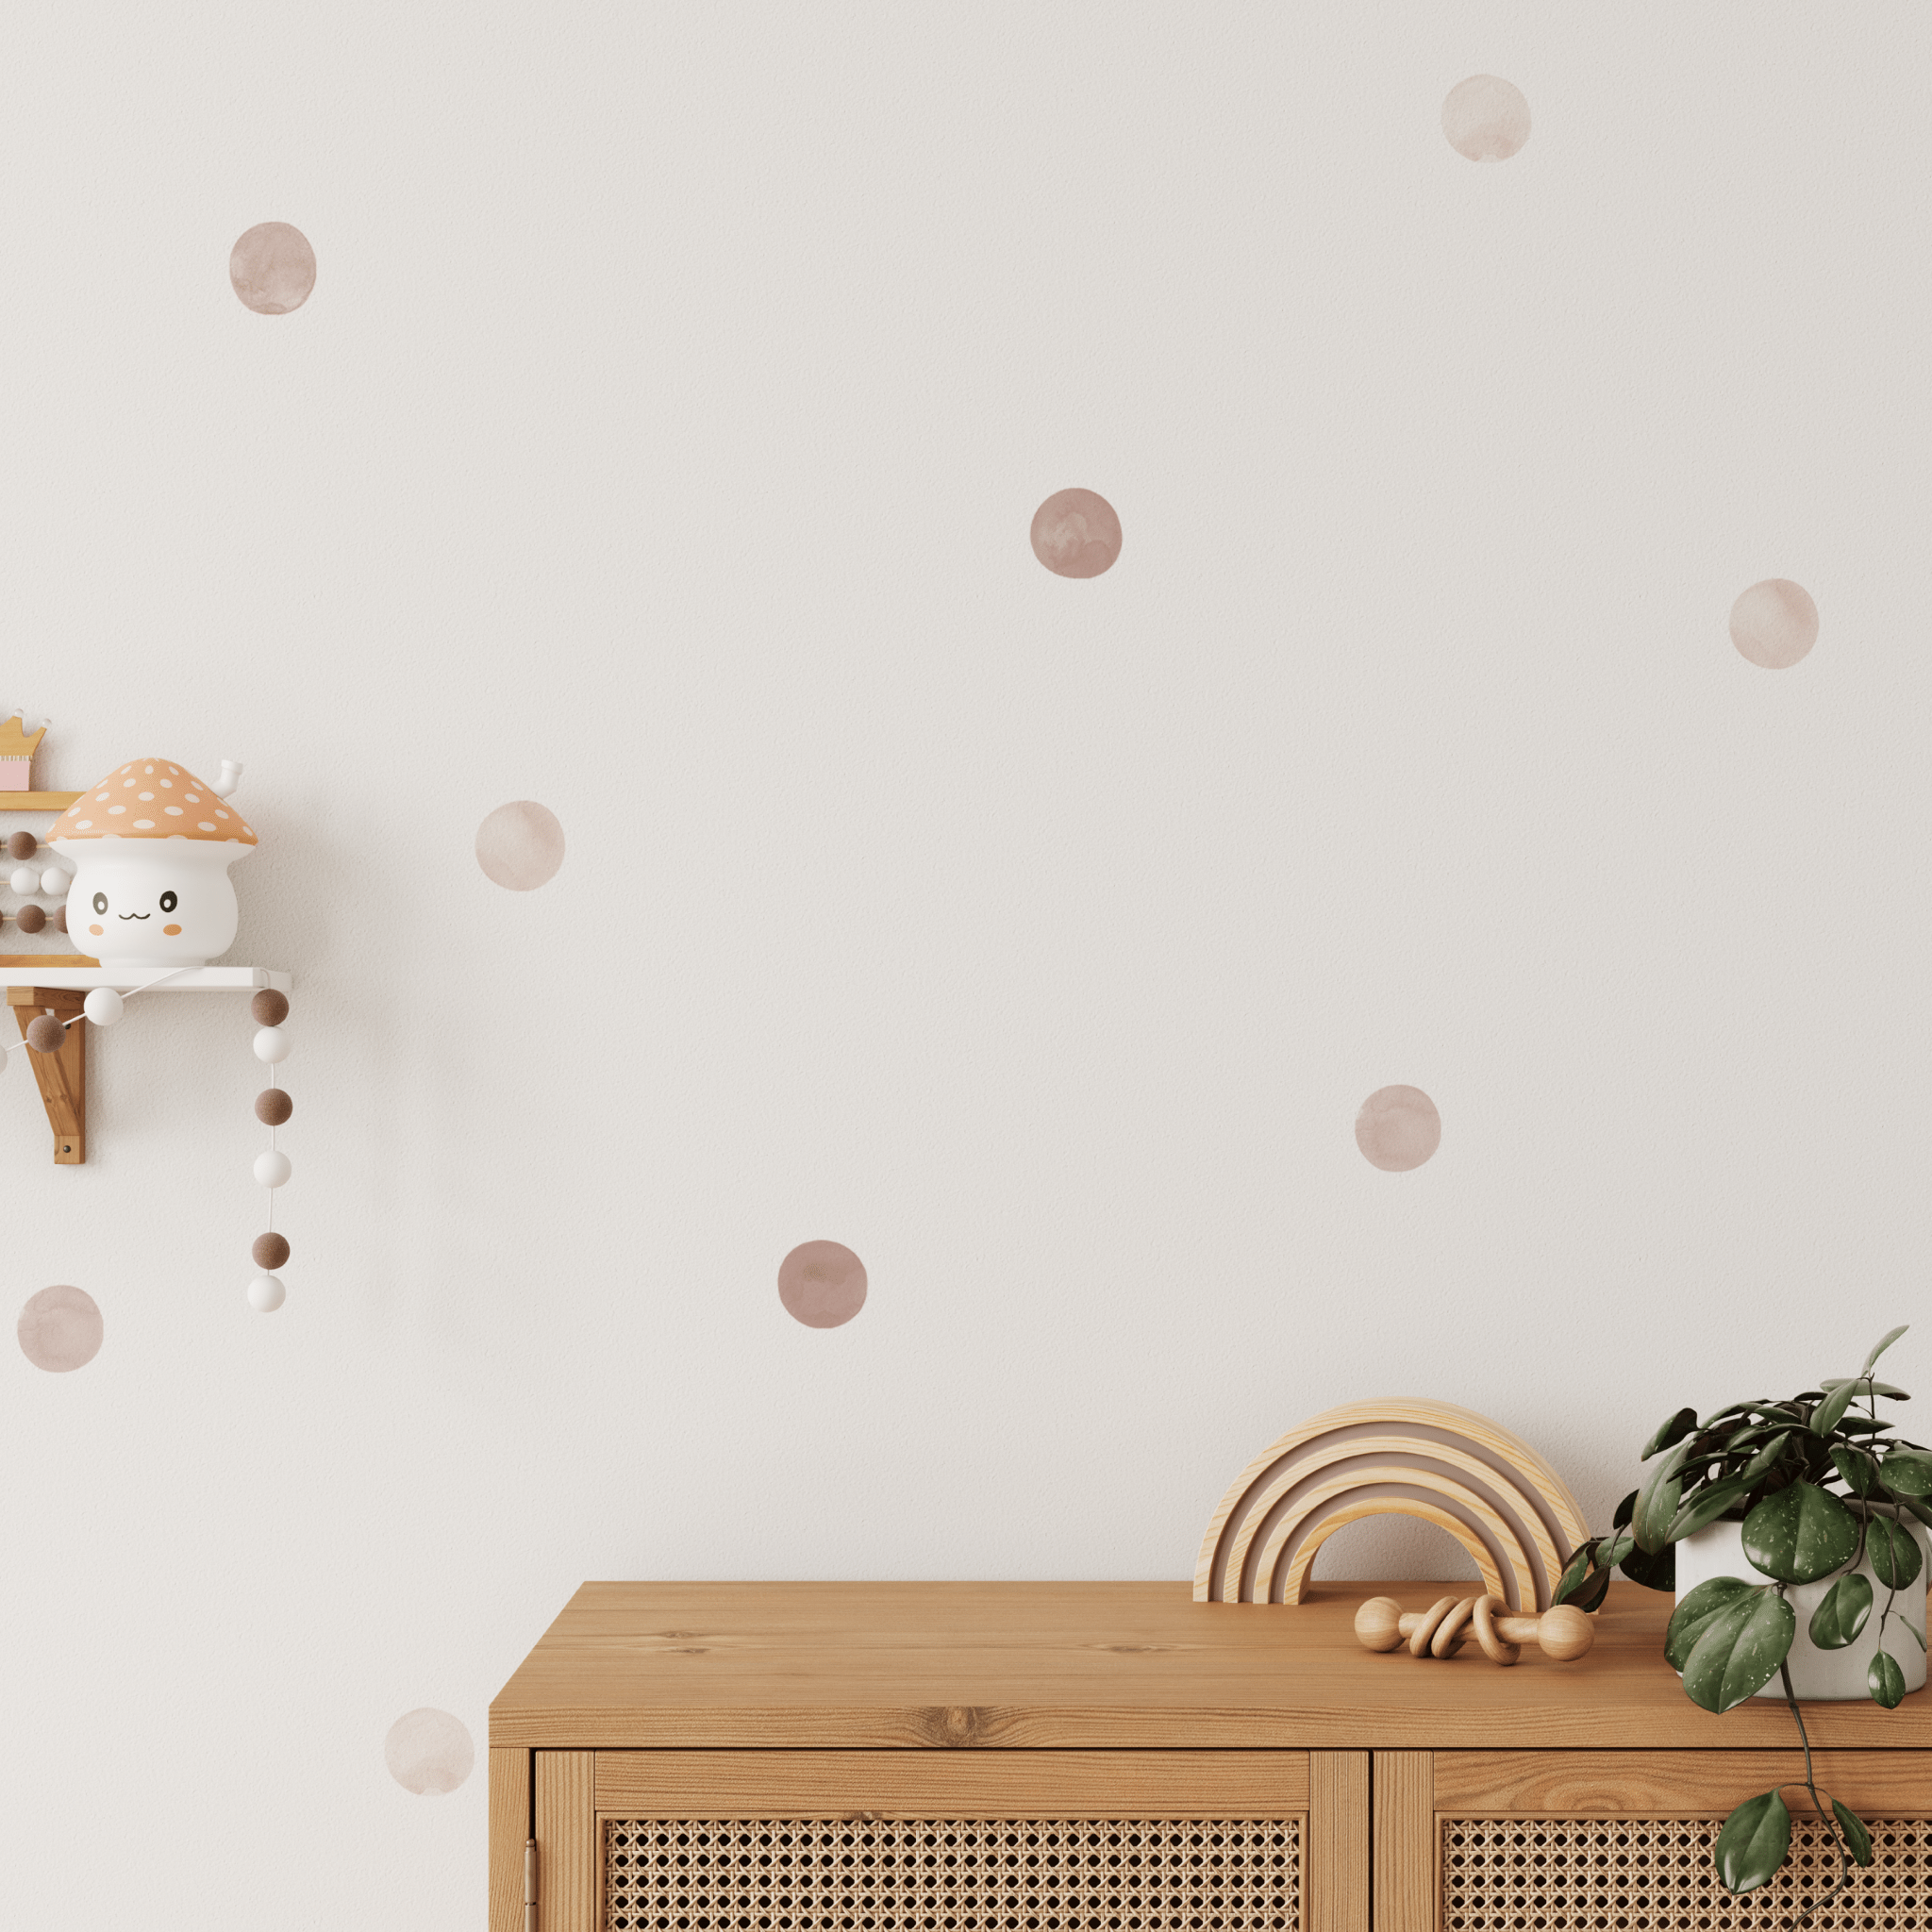 Dusty Pink peel and stick 2 inch wall dot stickers